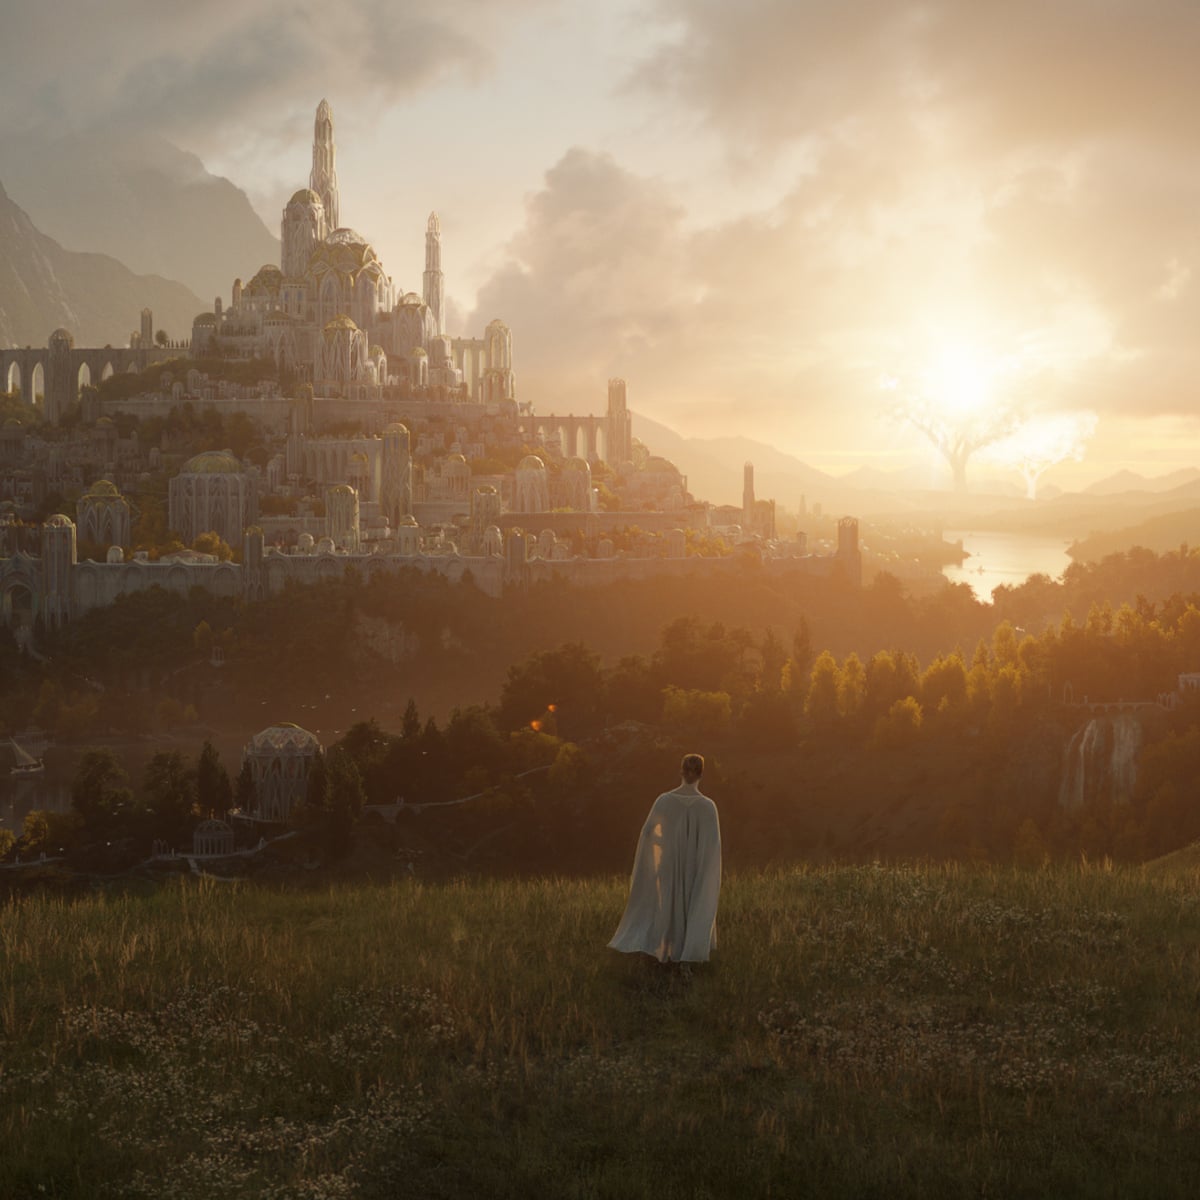 Voordracht In dienst nemen Hopelijk Full-length trailer for Amazon's £1bn Lord of the Rings prequel is released  | Lord of the Rings | The Guardian